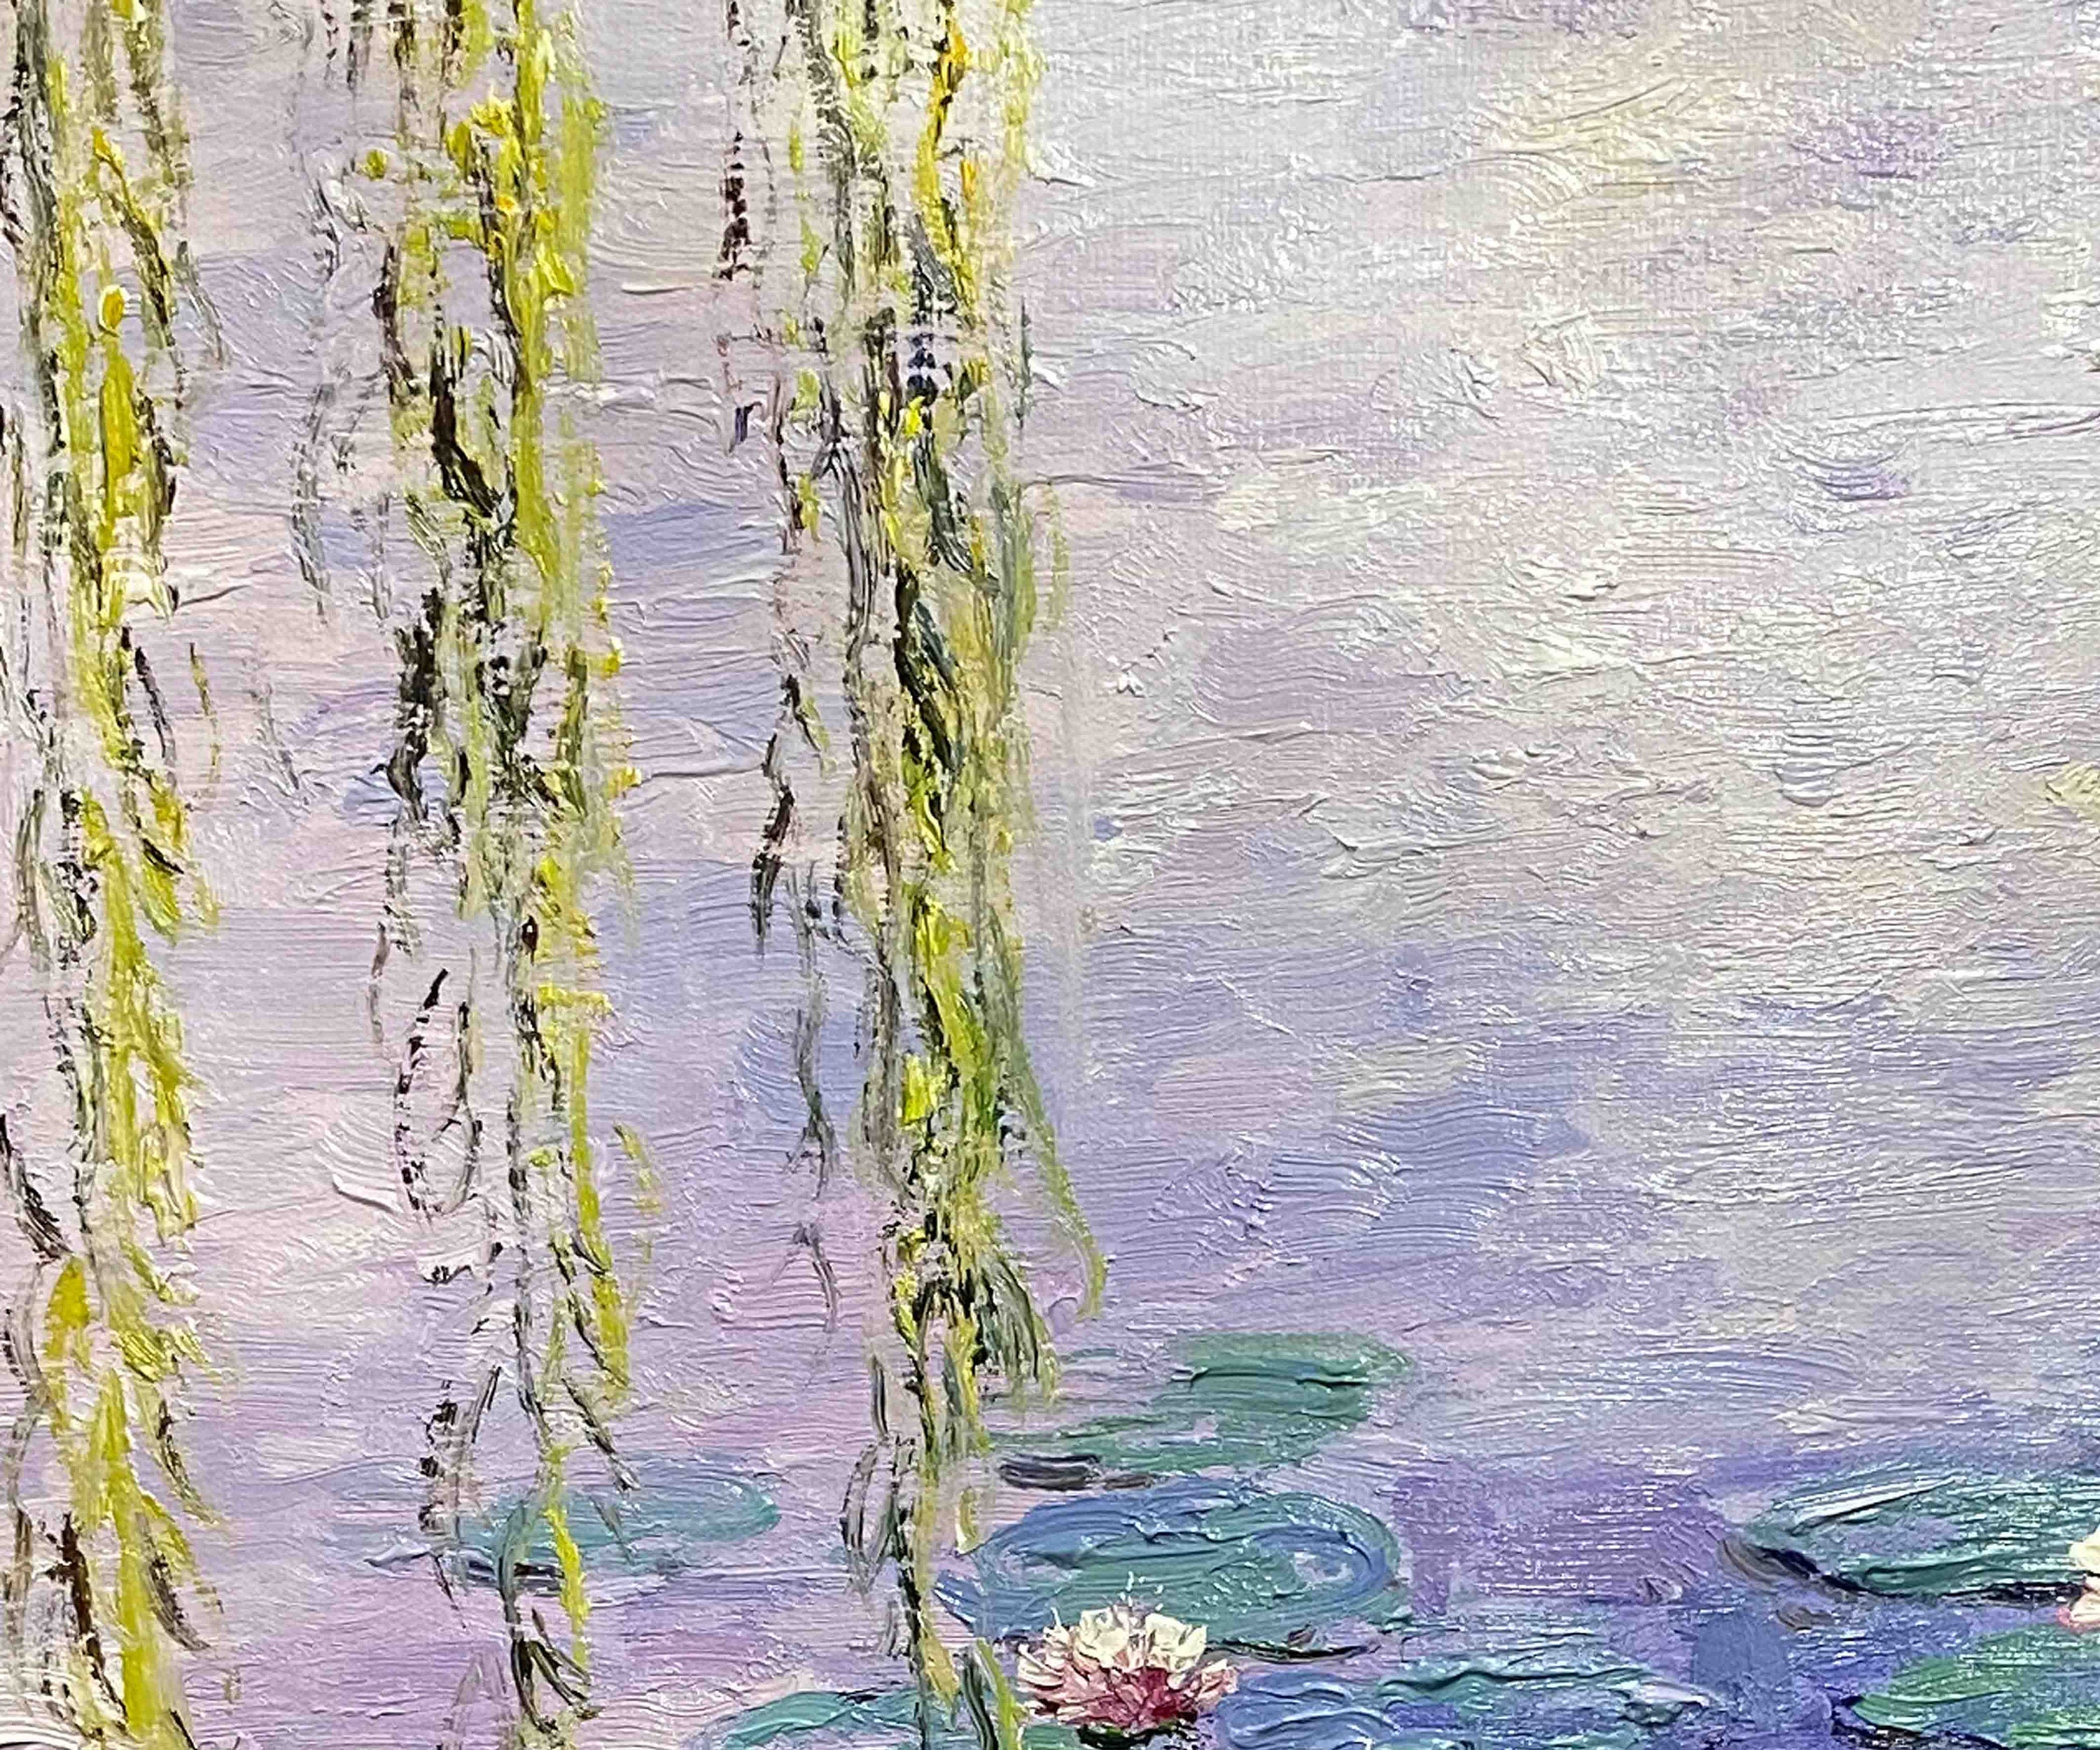 Water lily canvas painting, Monet water lilies wall decor, Claude monet  pond, Monet water plant oil painting 27.6 by 19.7 Painting by Lada Stukan